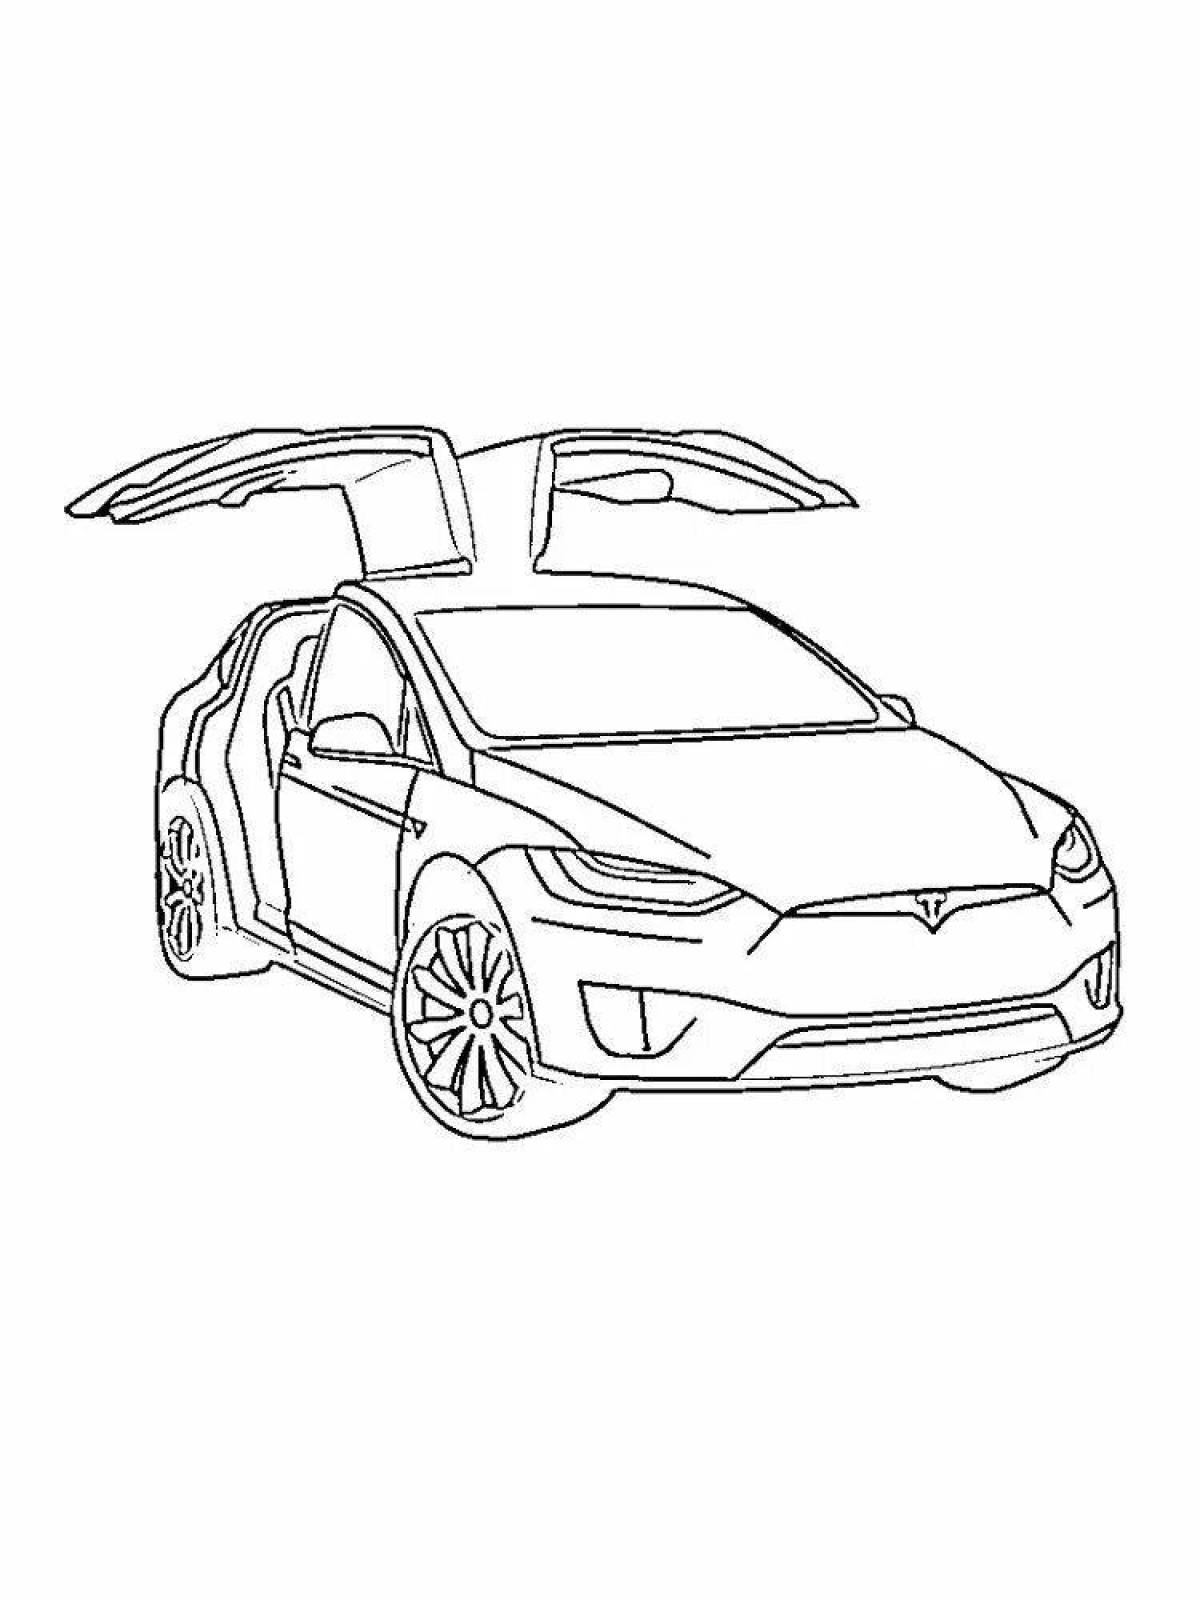 Coloring page with amazing tesla car